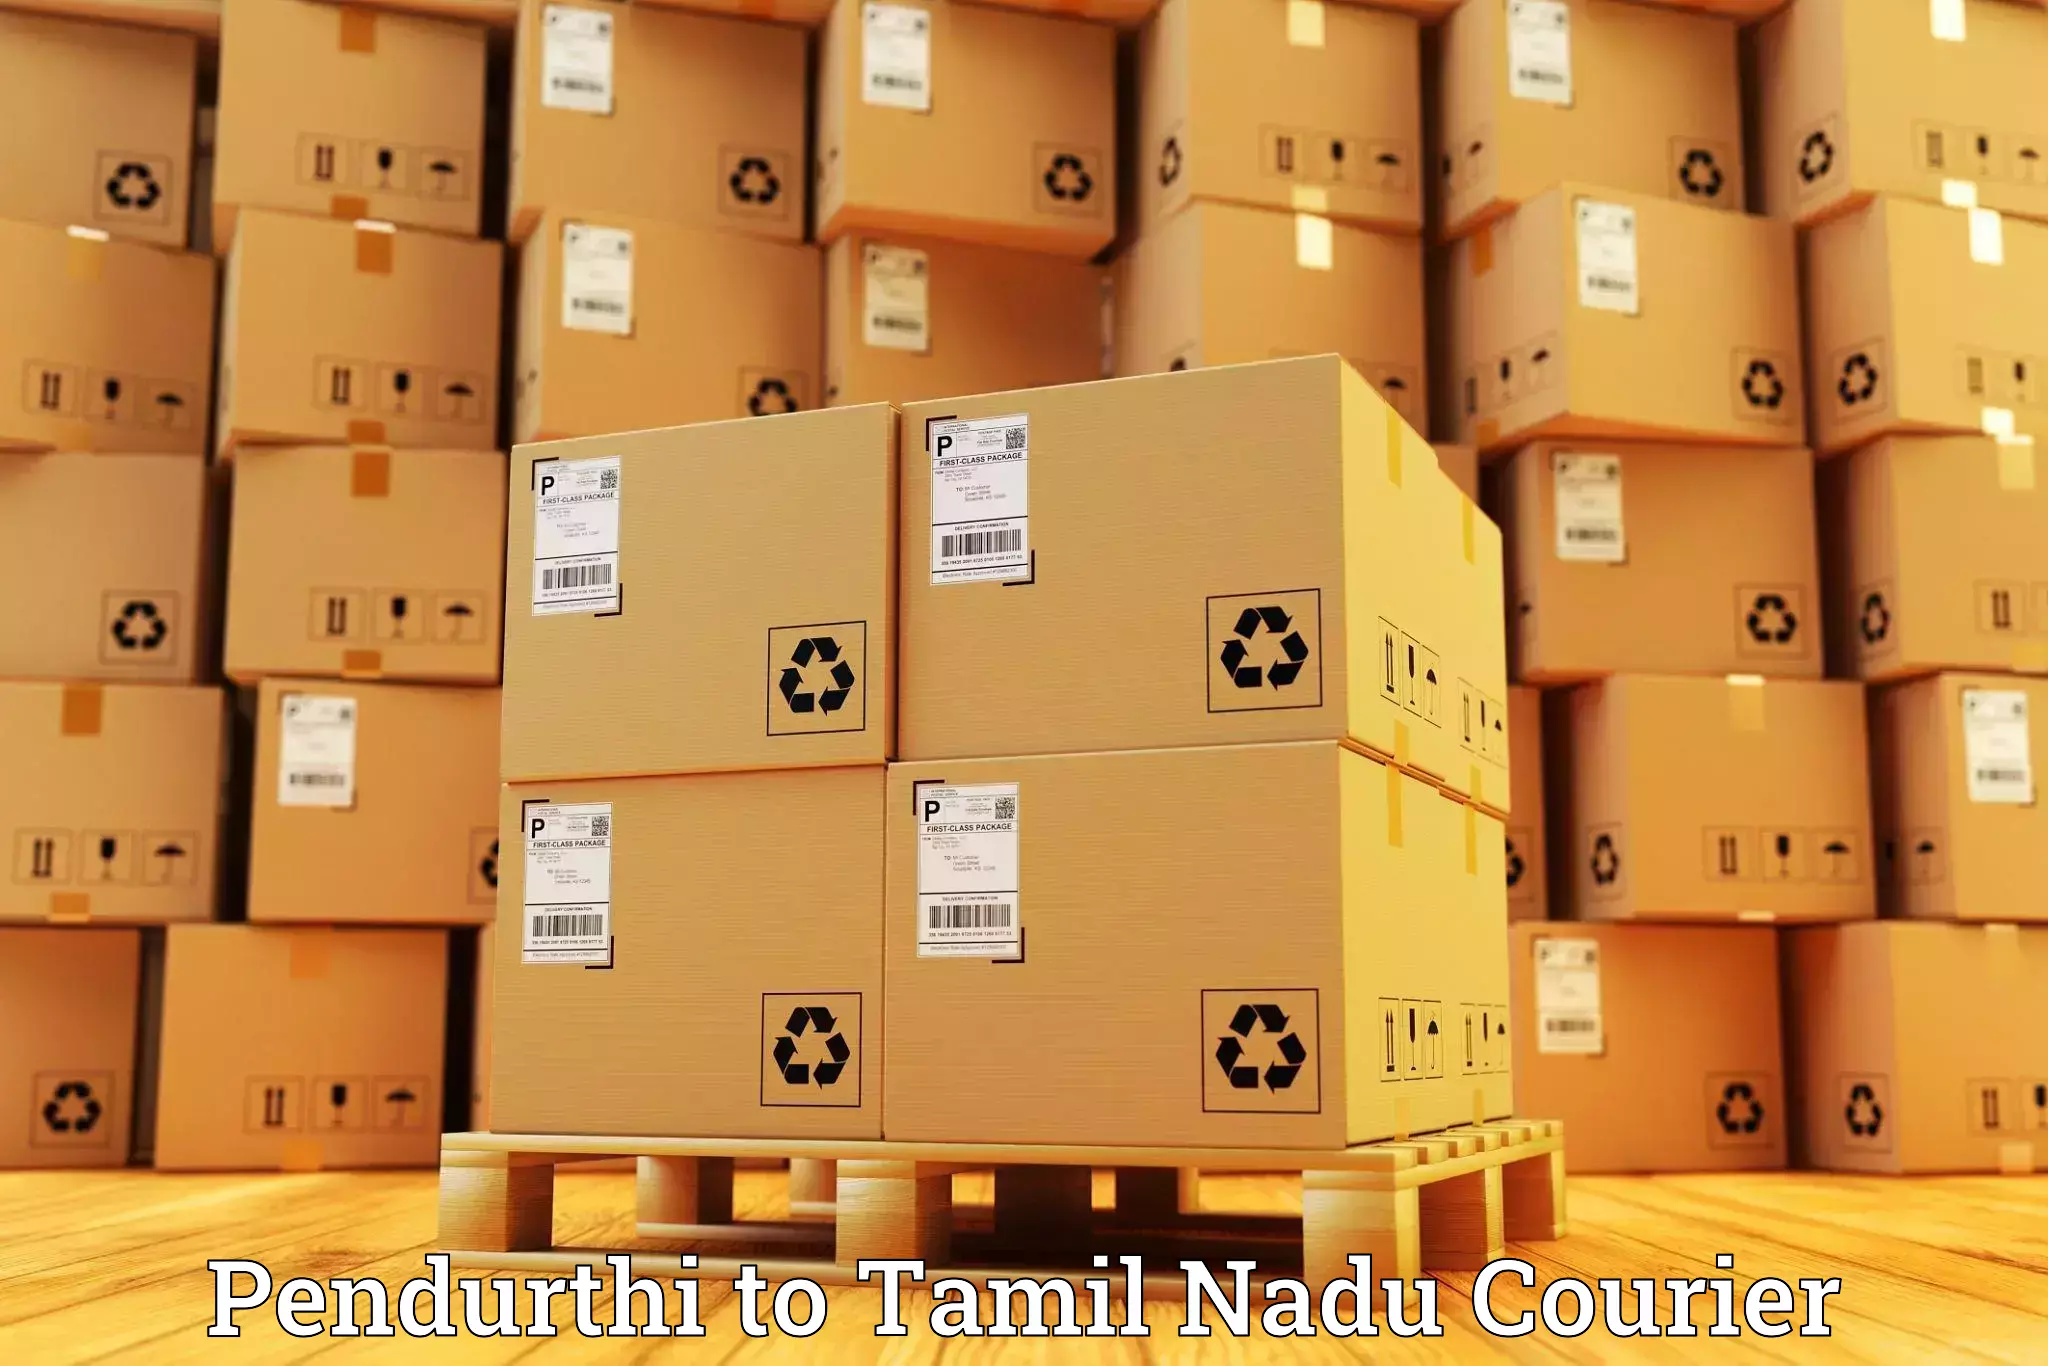 Courier service comparison Pendurthi to Thisayanvilai